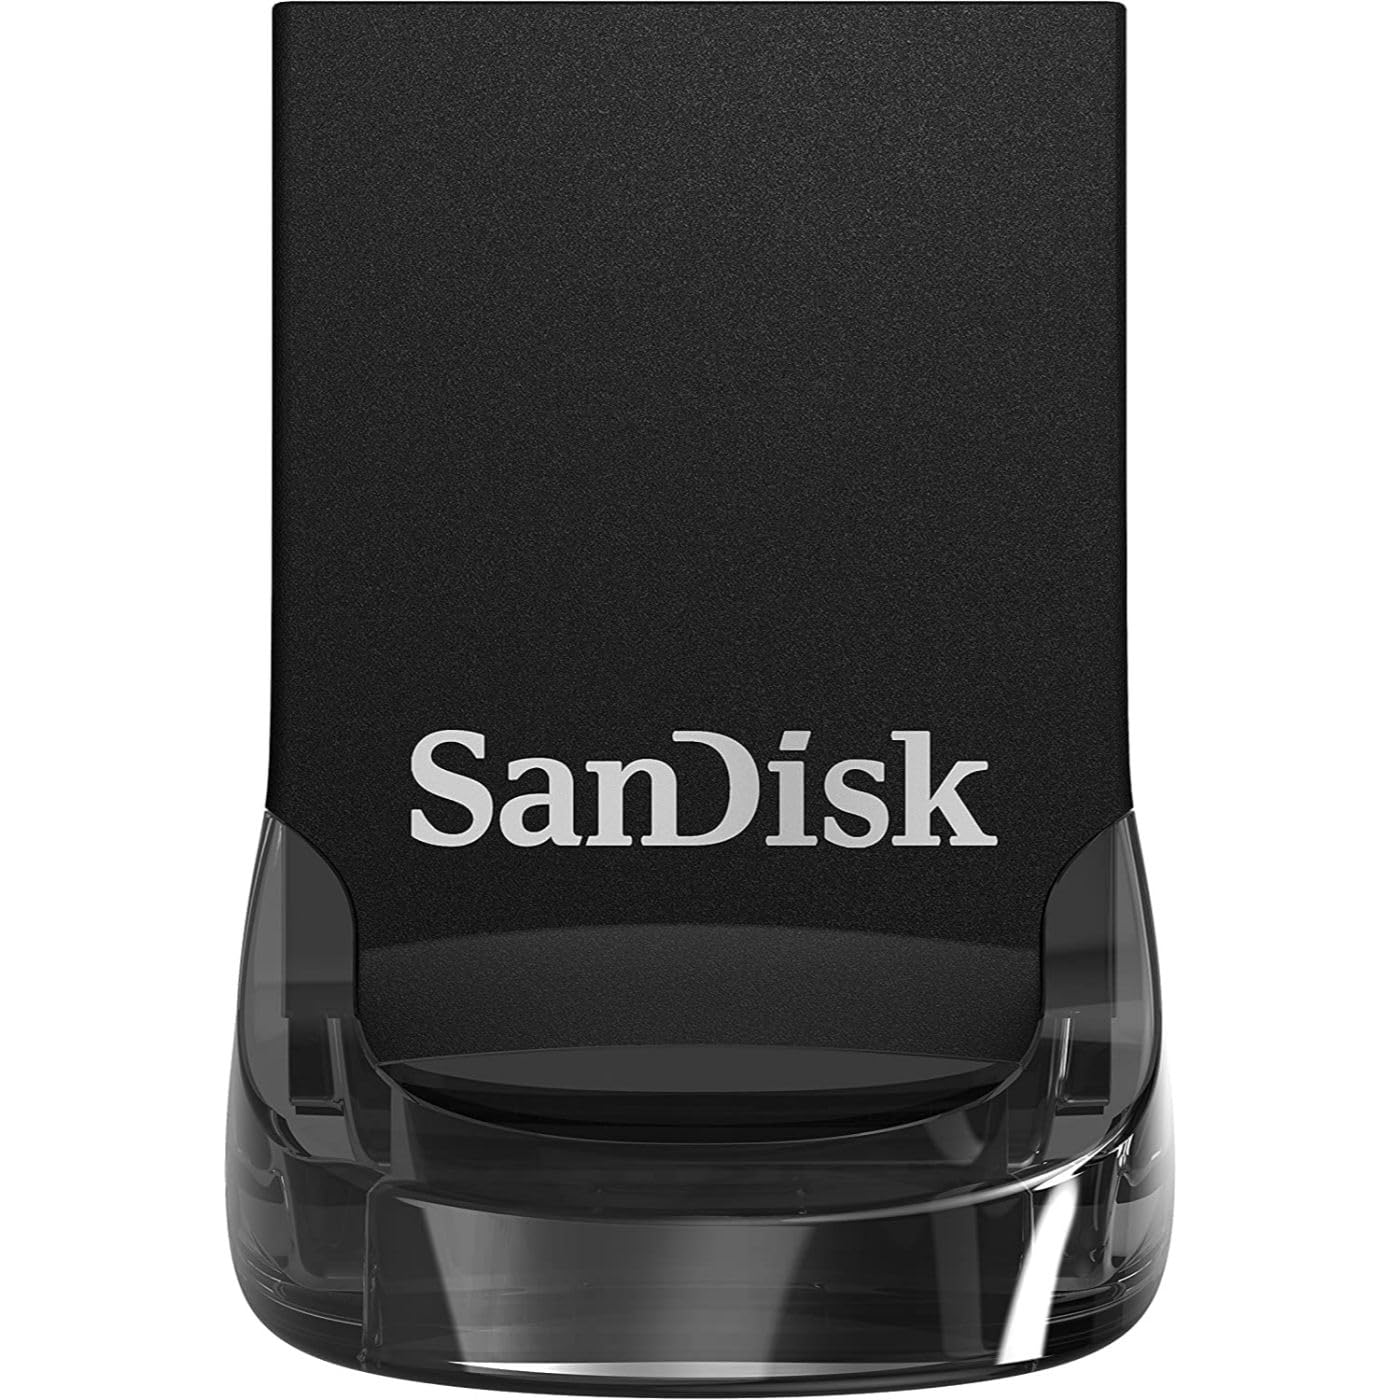 SanDisk 512GB Ultra Fit USB 3.2 Gen 1 Flash Drive - Up to 400MB/s, Plug-and-Stay Design - SDCZ430-512G-GAM46, Black